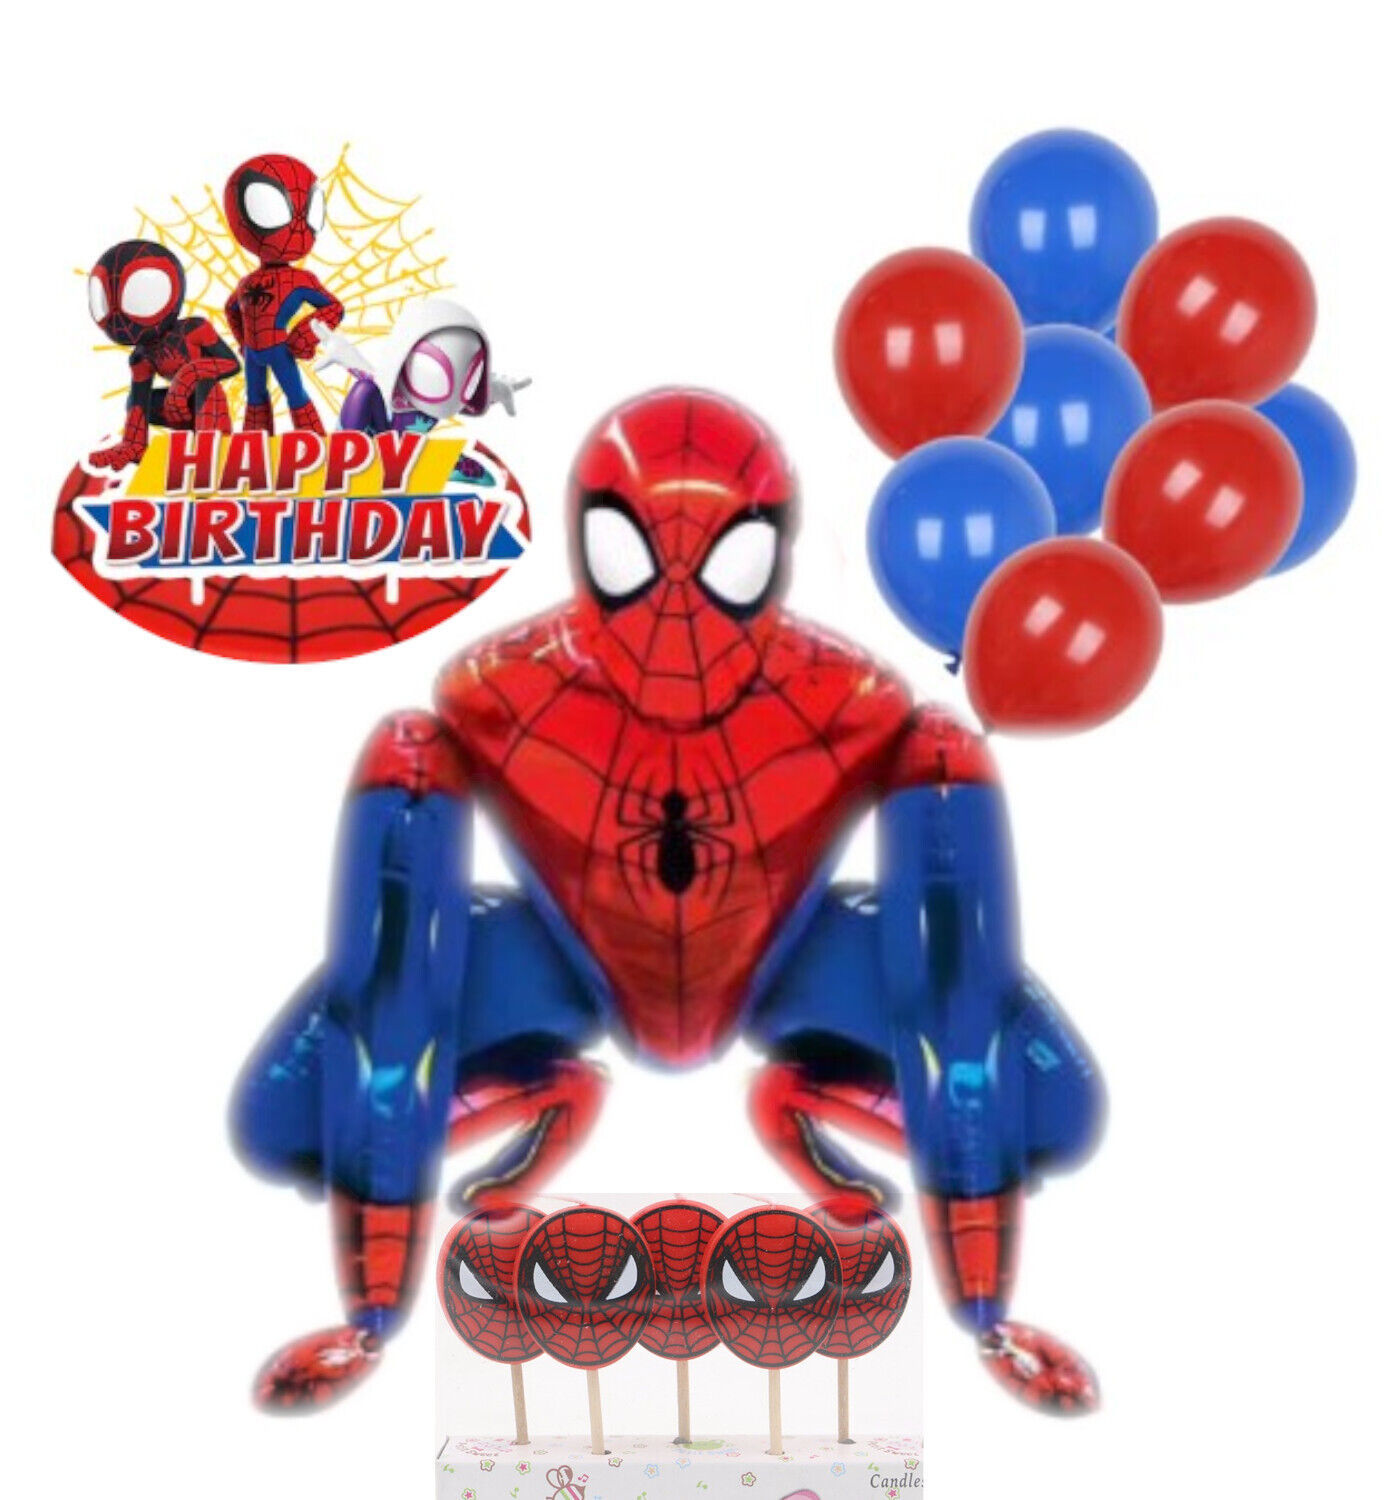 Large 3D Spiderman Birthday Party Pack 13-18pc - $19.00 - $22.00